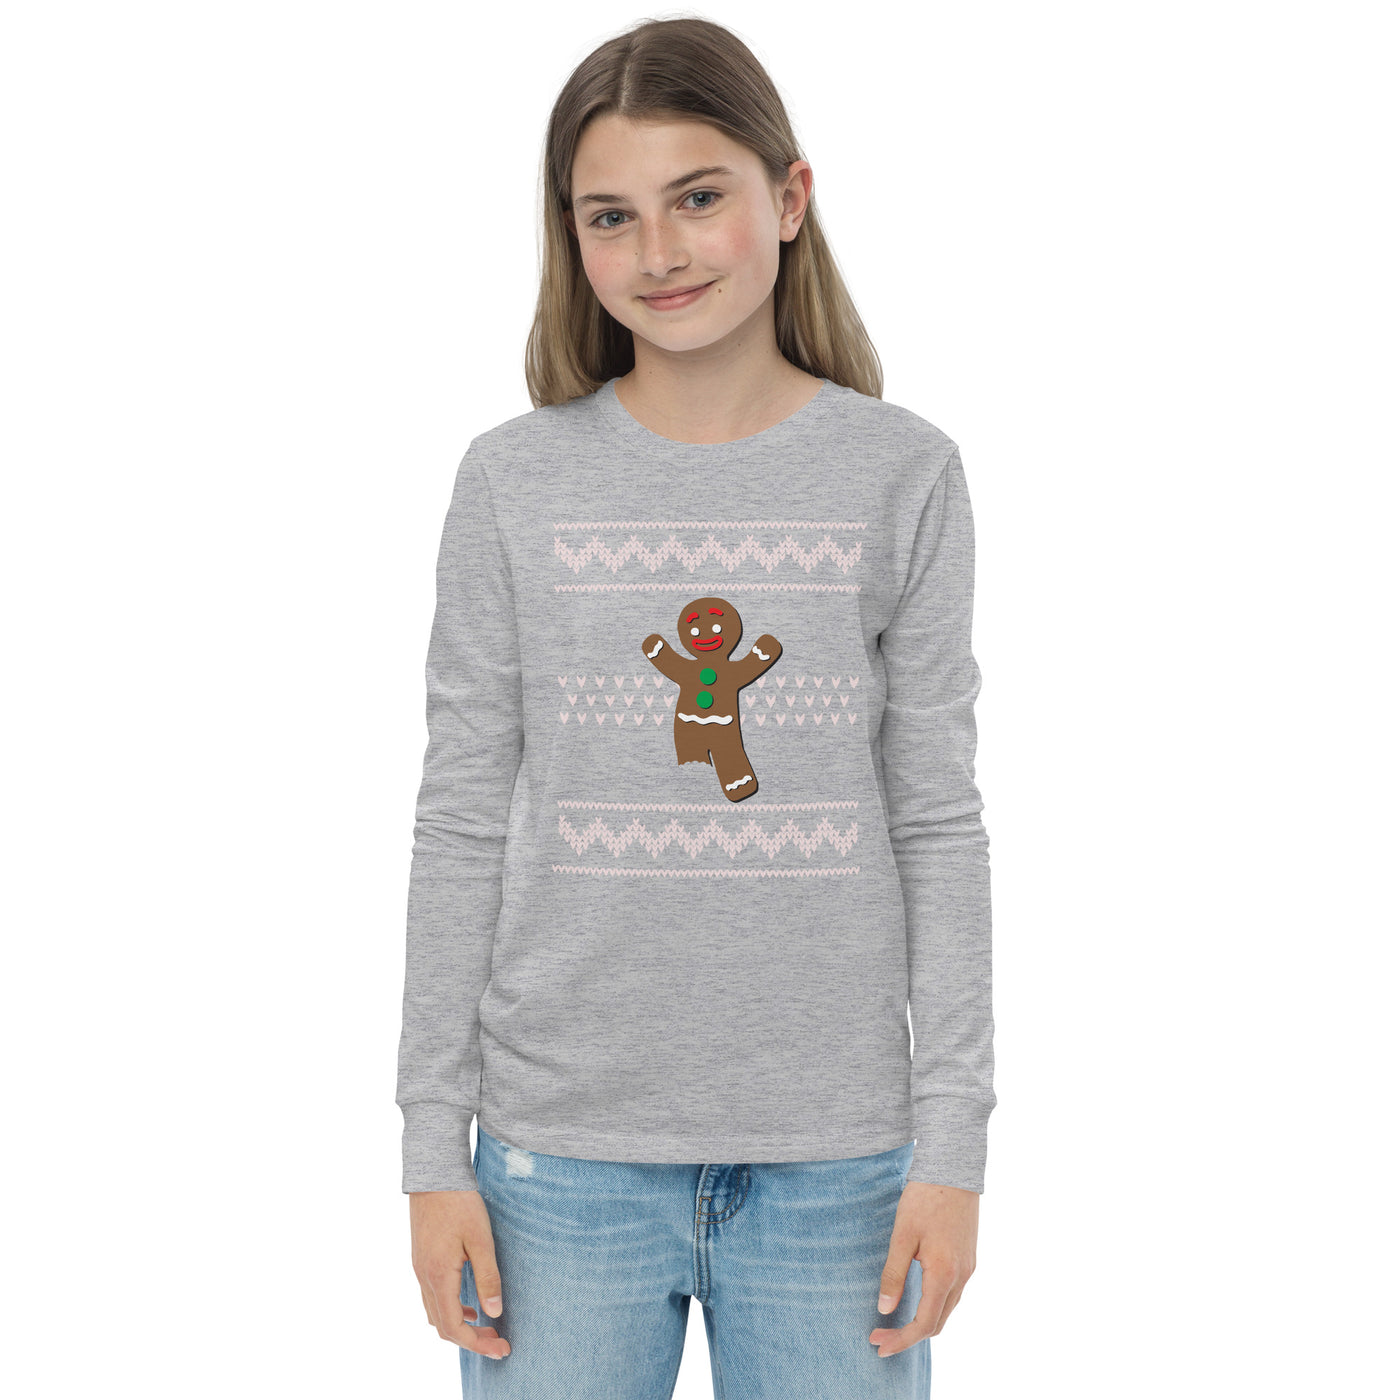 Youth long sleeve Right Amputee Gingerbread tee